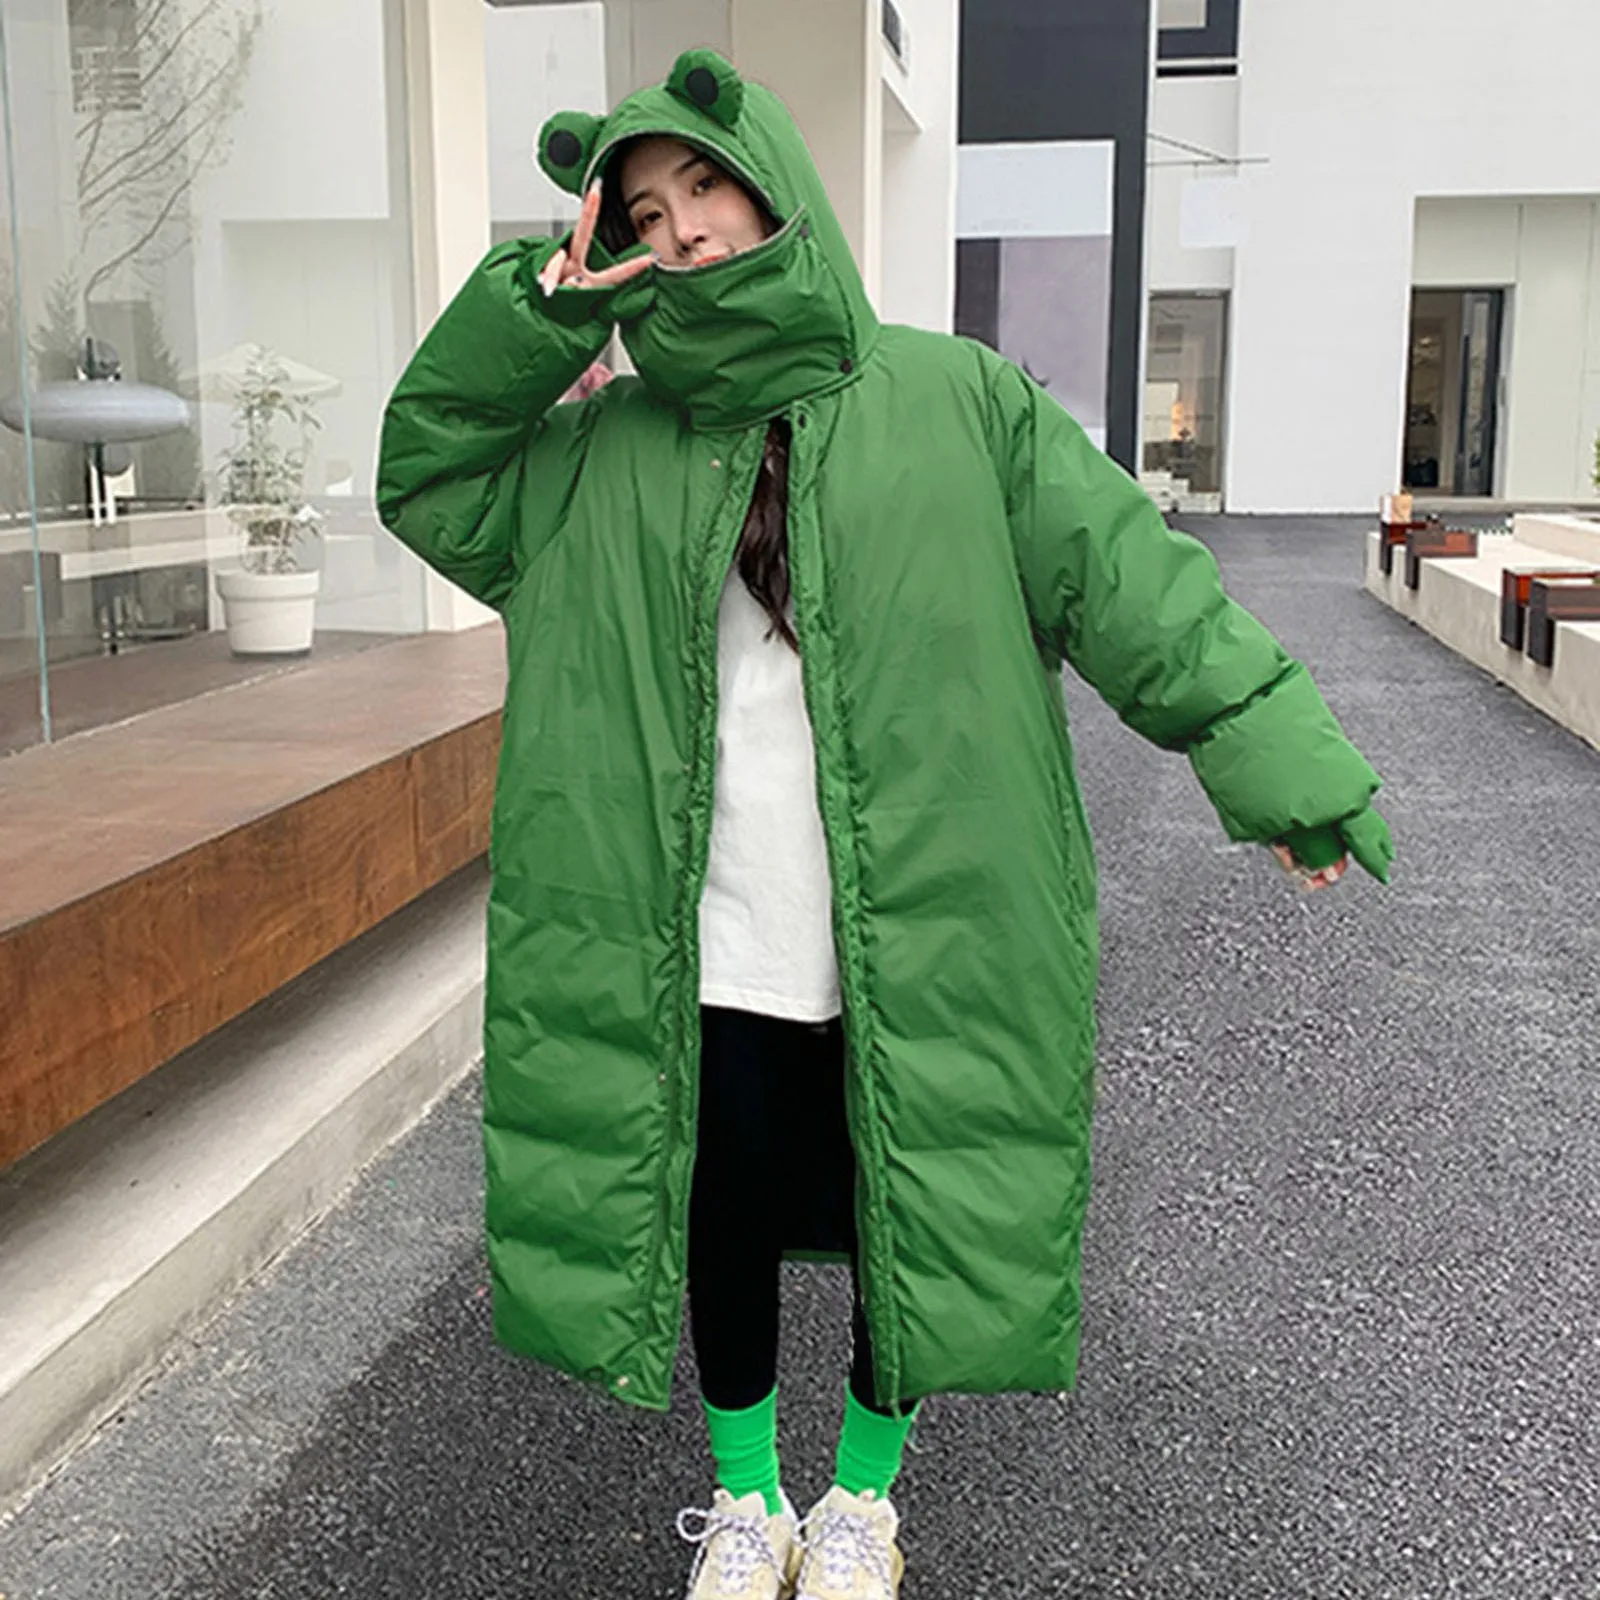 Ugly Funny Fog Jacket Womens Autumn Winter Green Parkas Hoodies Slim Outdoor Padded Blazer Korean Doll Cosplay Chaquetas Mujer fishing trout 3d all over print crewneck hoodies sweatshirts zipper shorts outdoor vocation sport streetwear unisex clothing